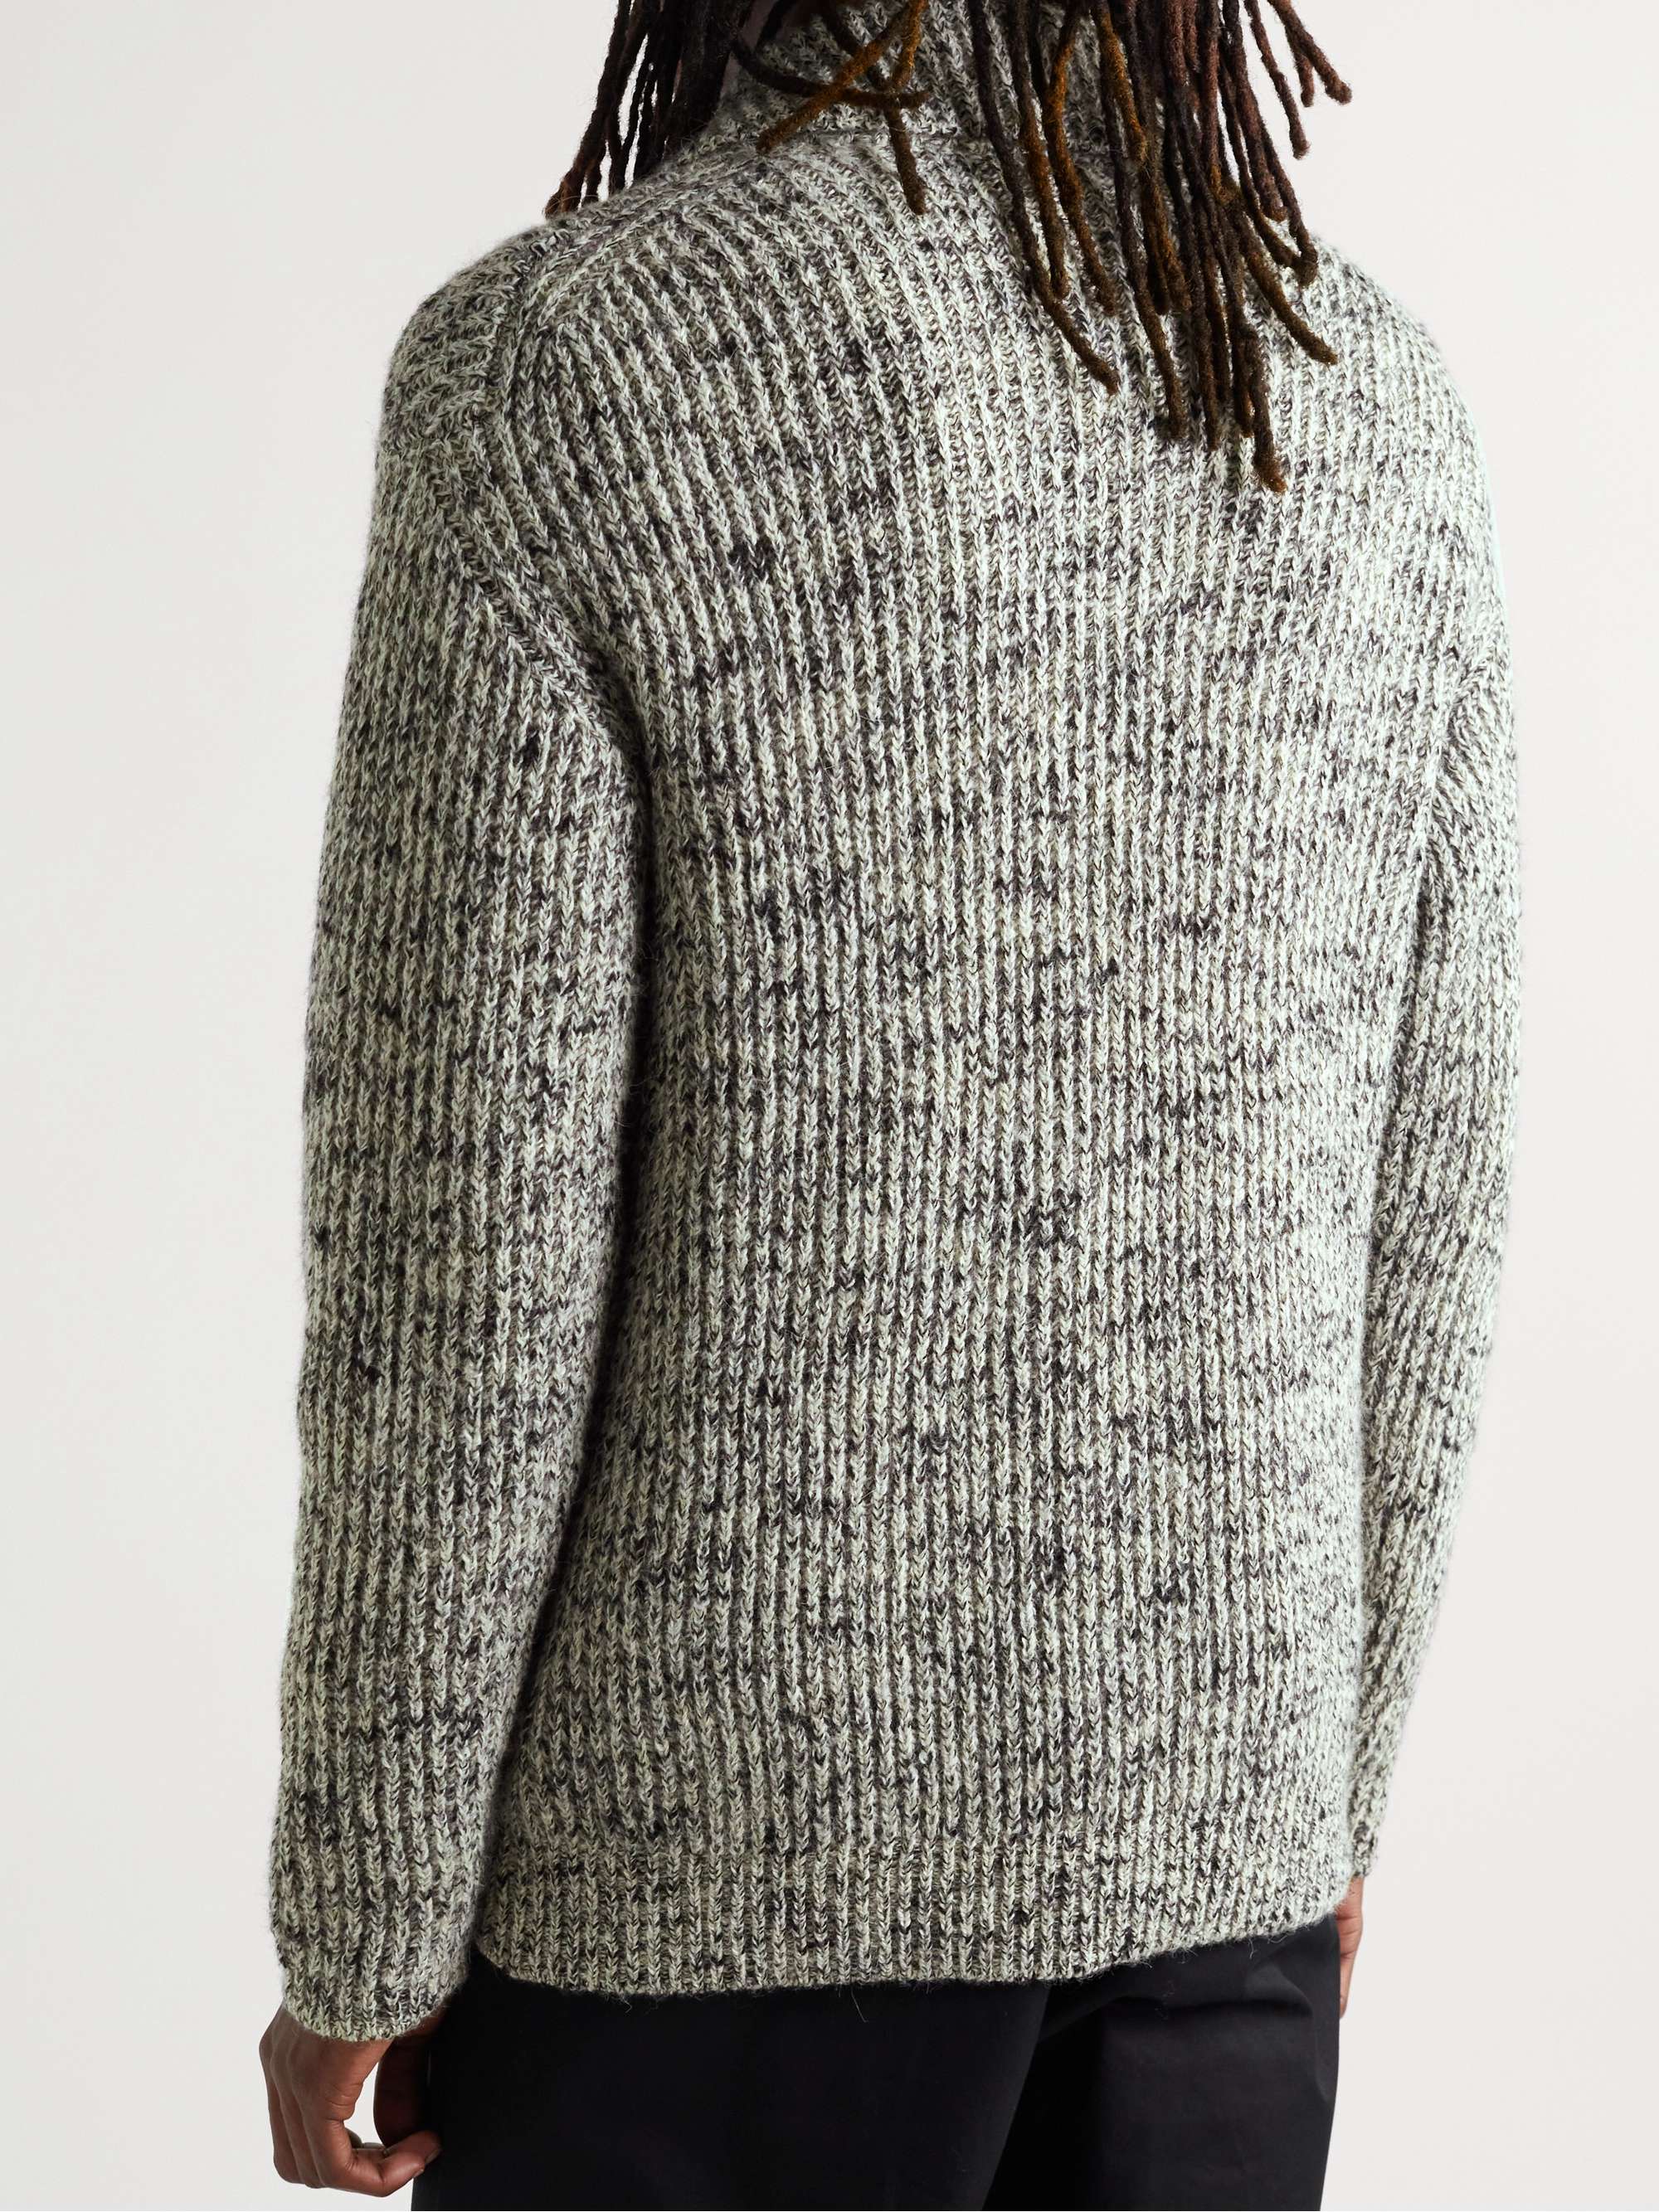 Ribbed Wool and Alpaca-Blend Zip-Up Sweater